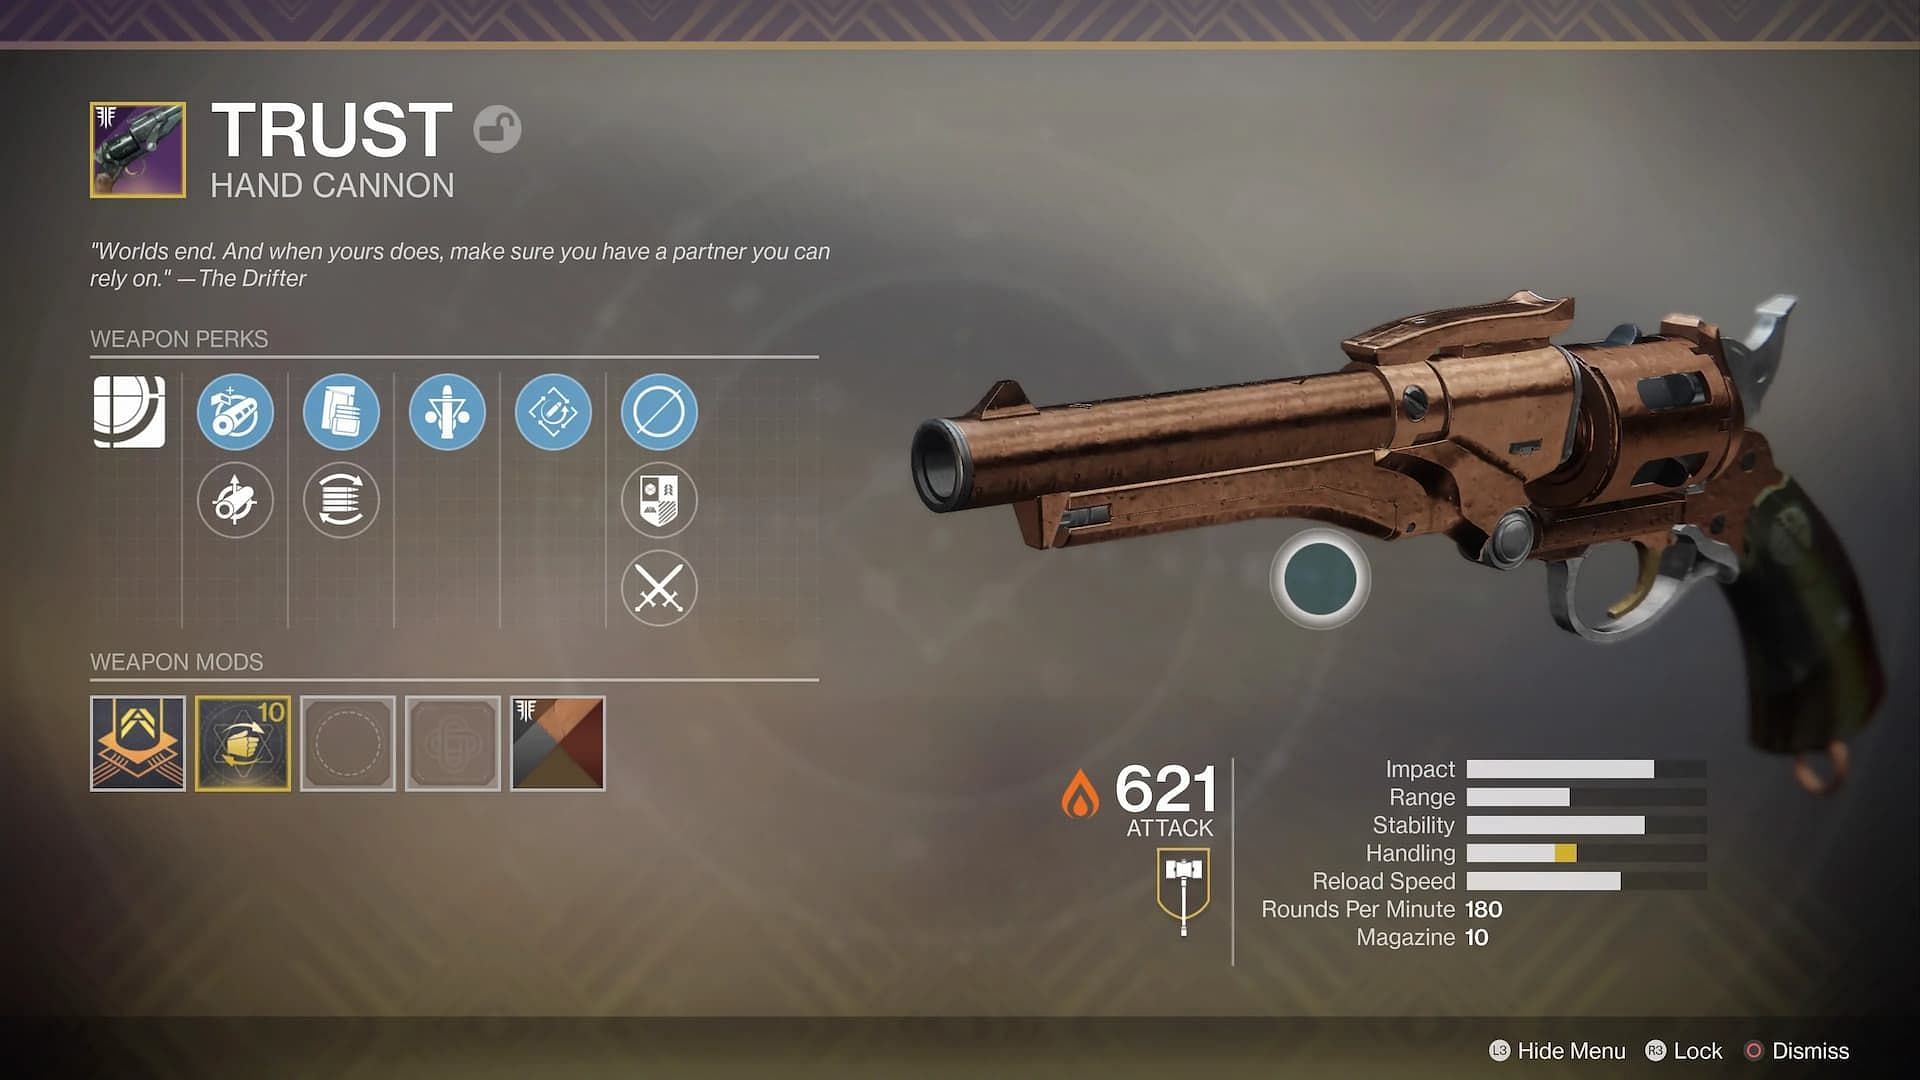 How to get the Trust Hand Cannon in Destiny 2